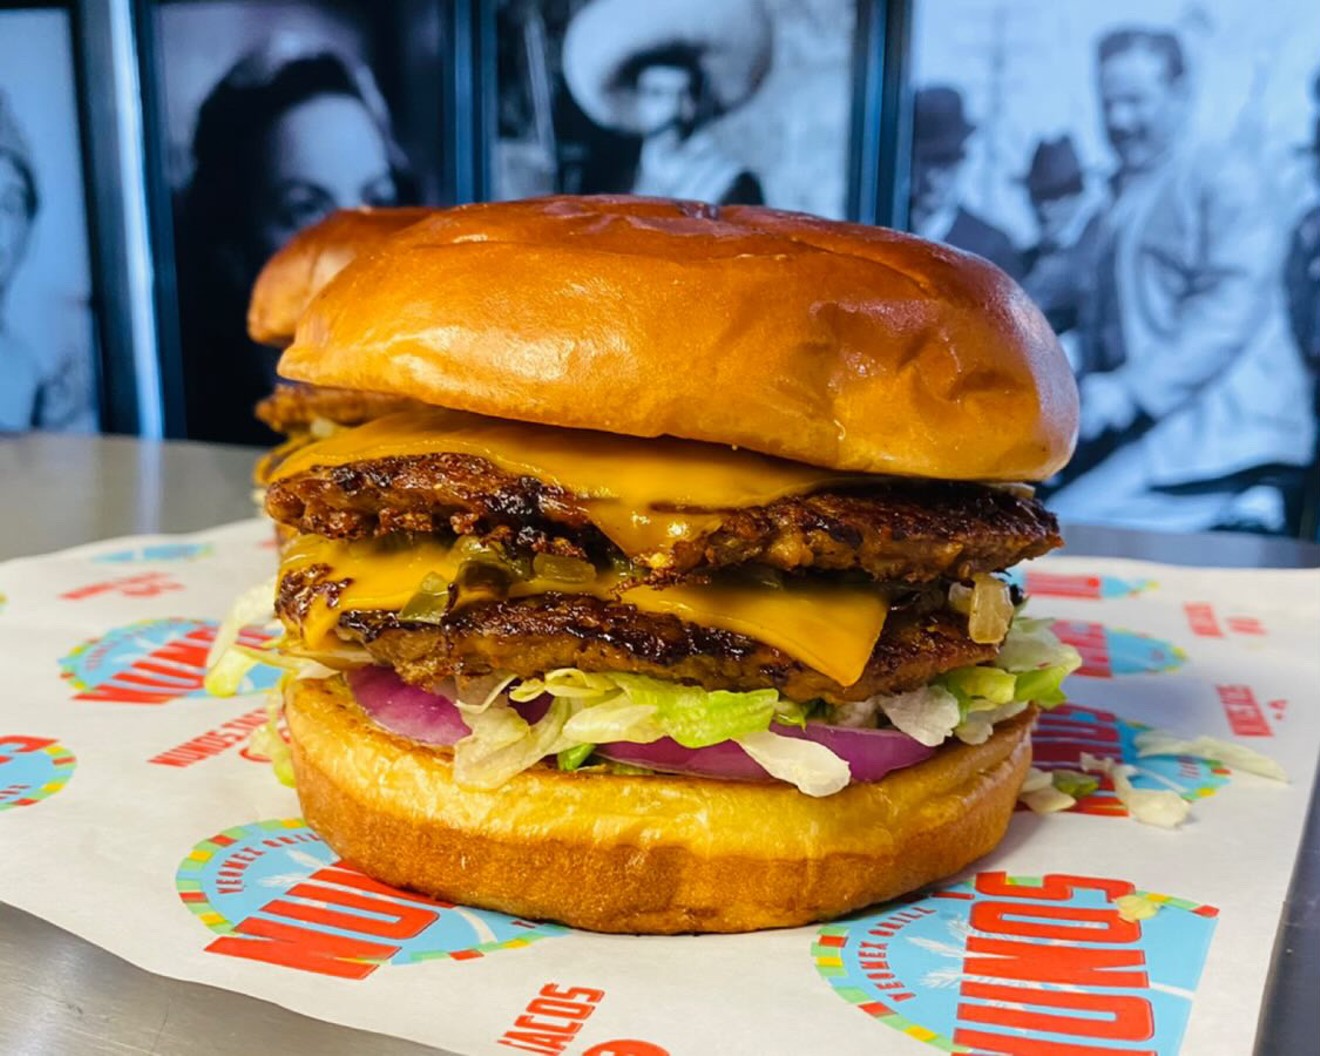 Try the signature Nuno's Vegmex burger double-pattied. It's layered with blankets of vegan cheese.